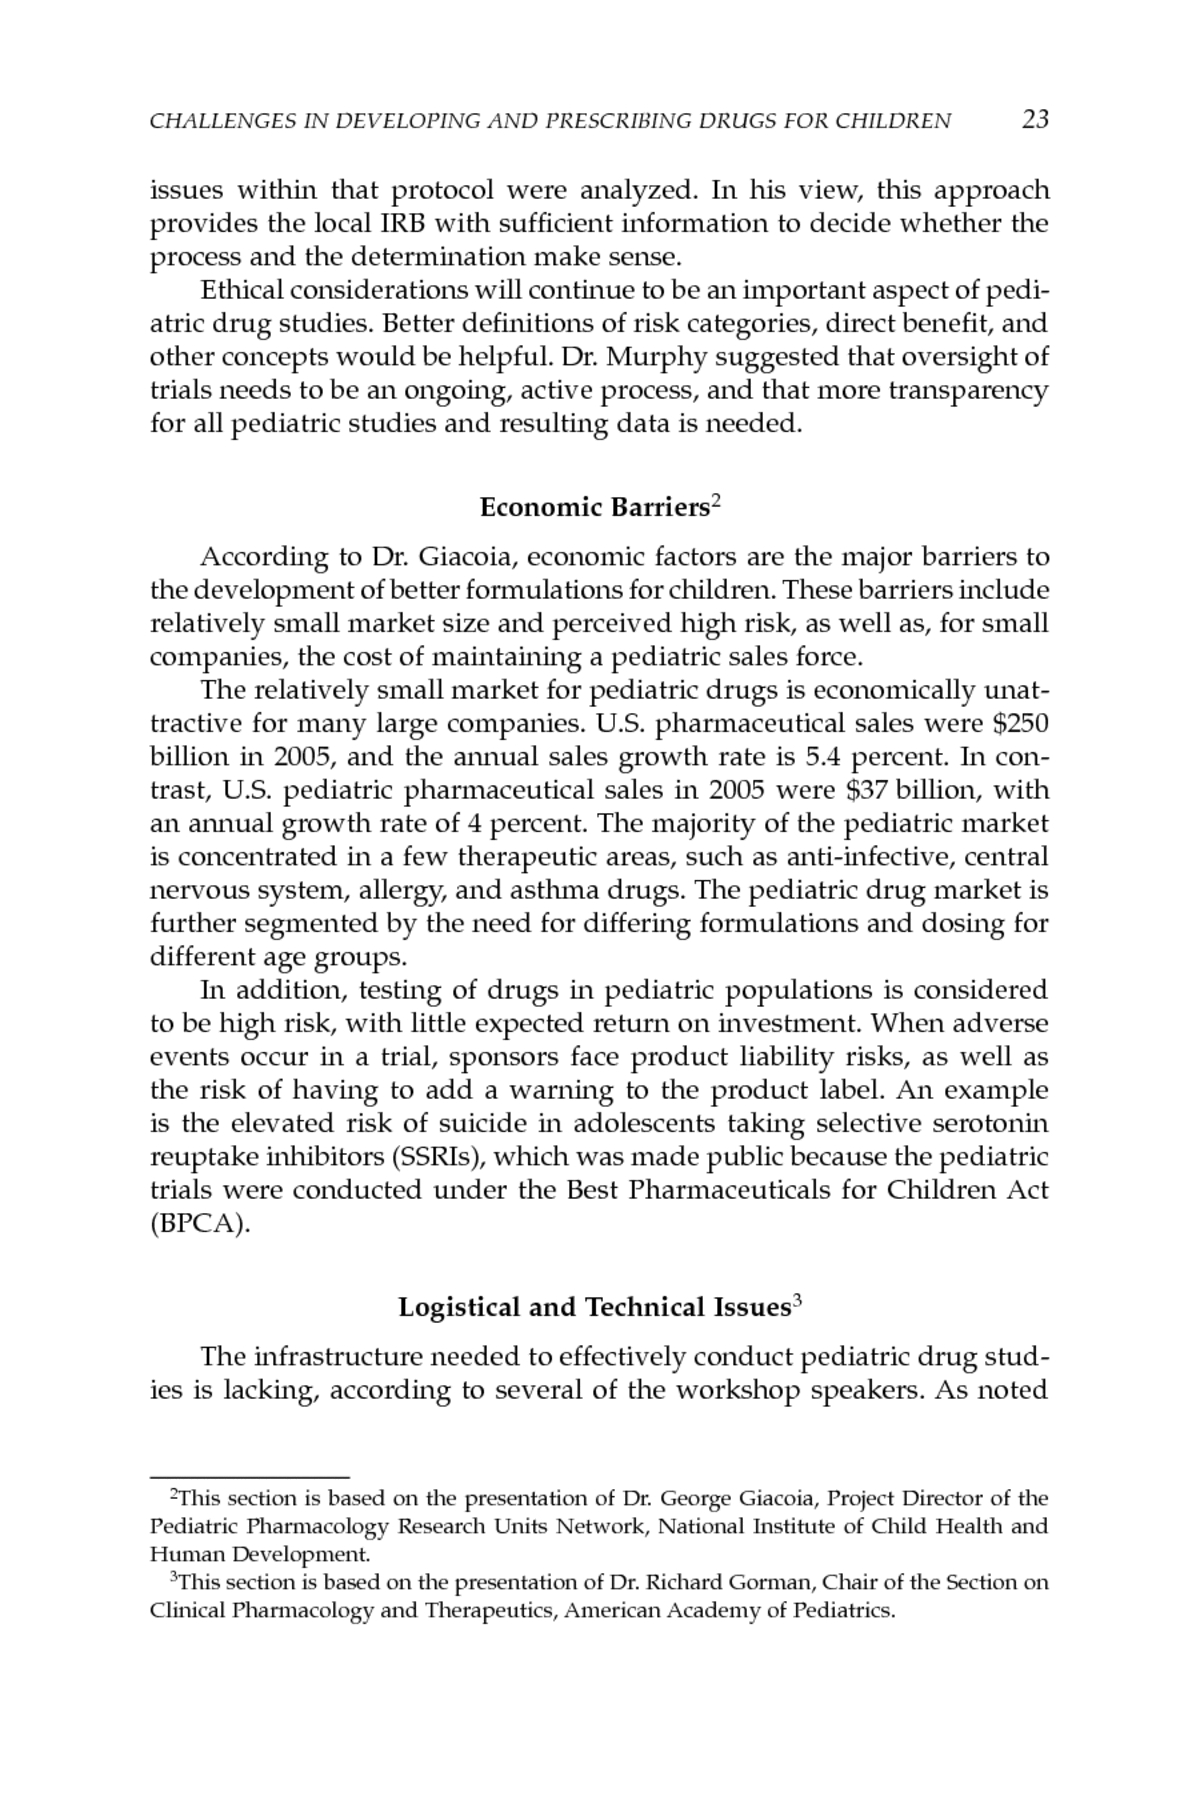 Reference Letter Template Sample - Professional Reference Letter for A Friend Image Collections